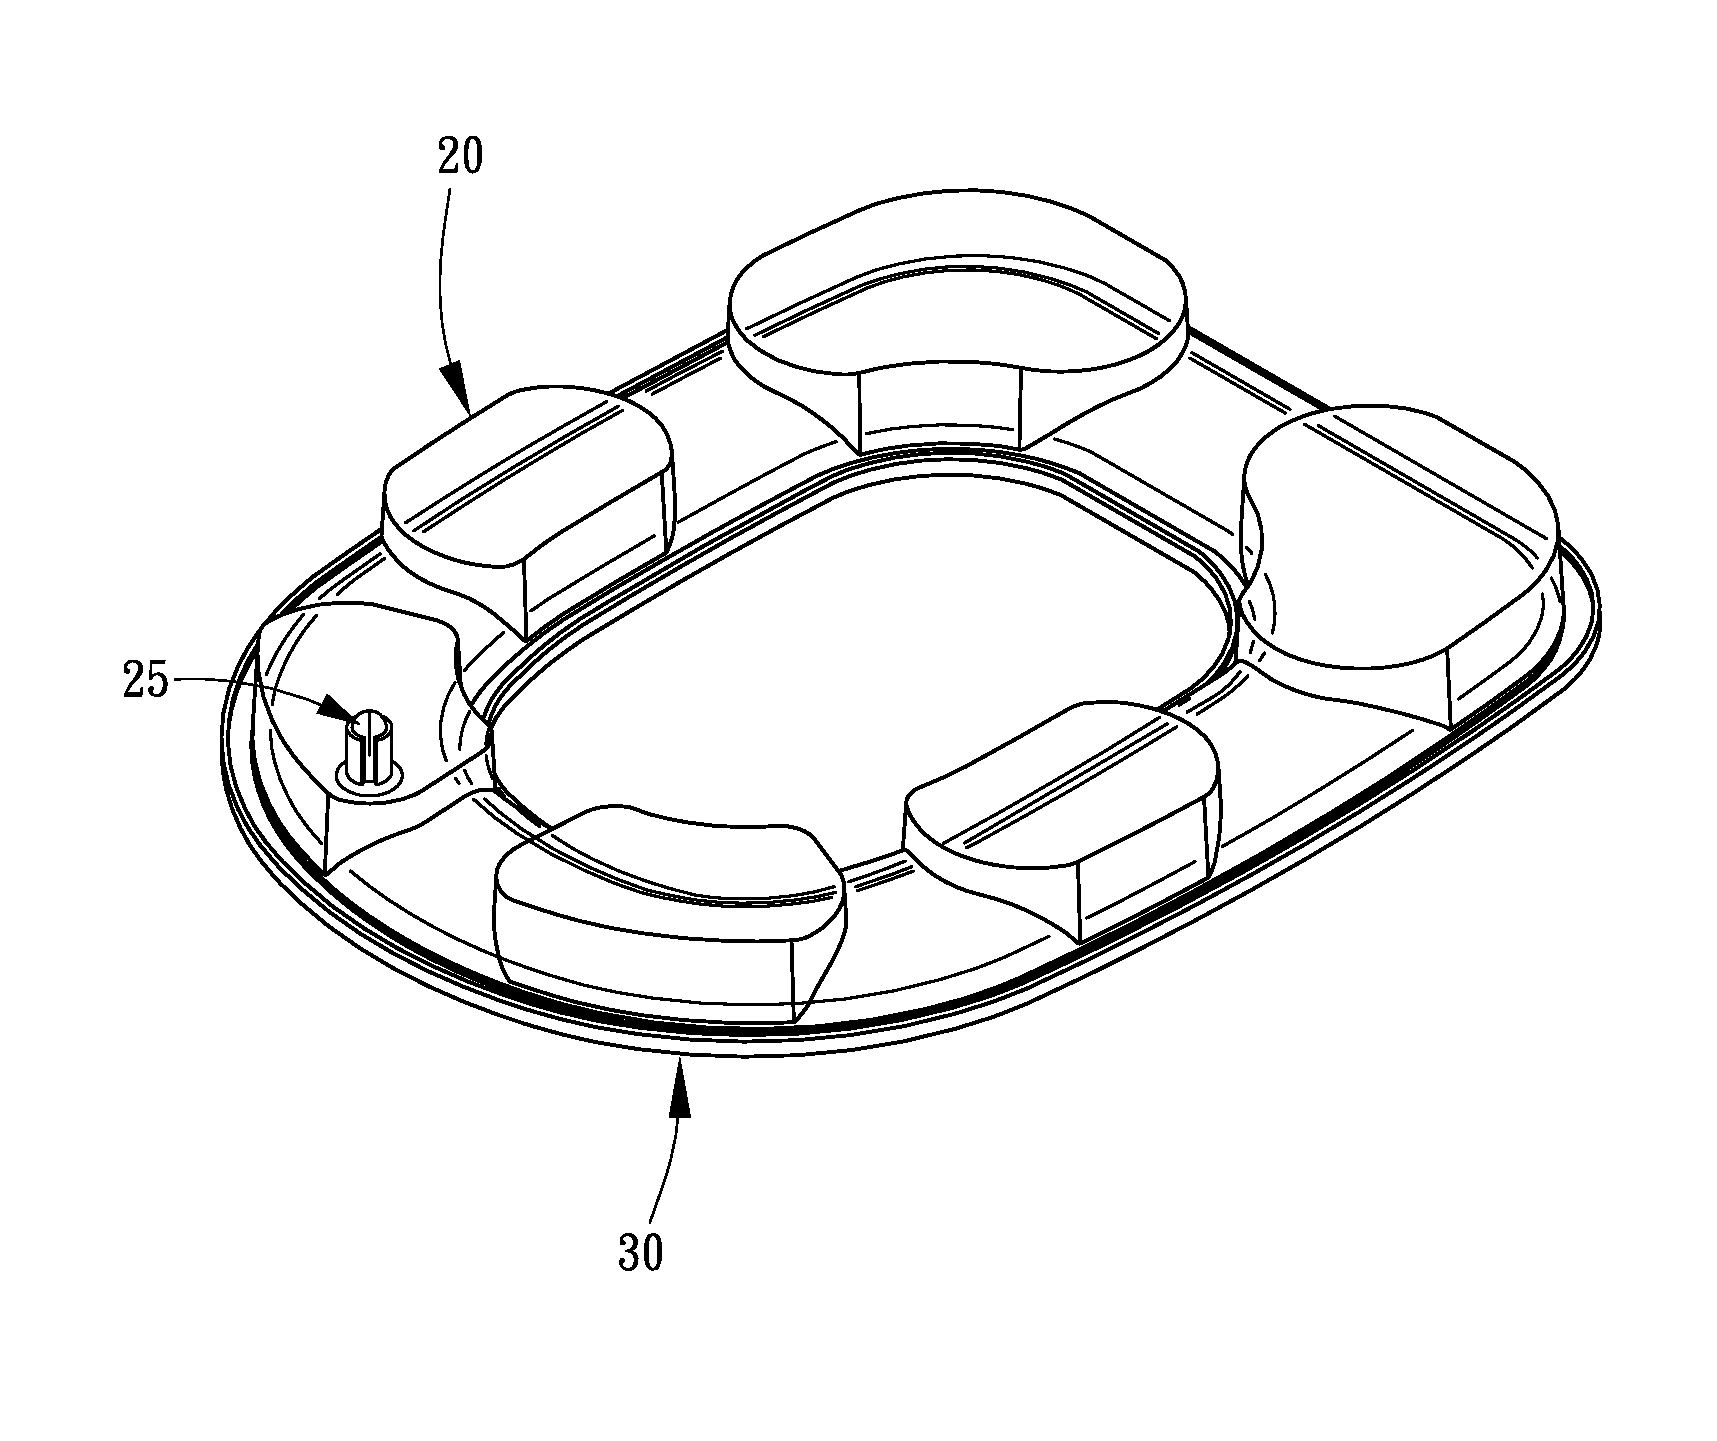 Air pressure adjustable elastic body used in shoe sole as a shock absorber